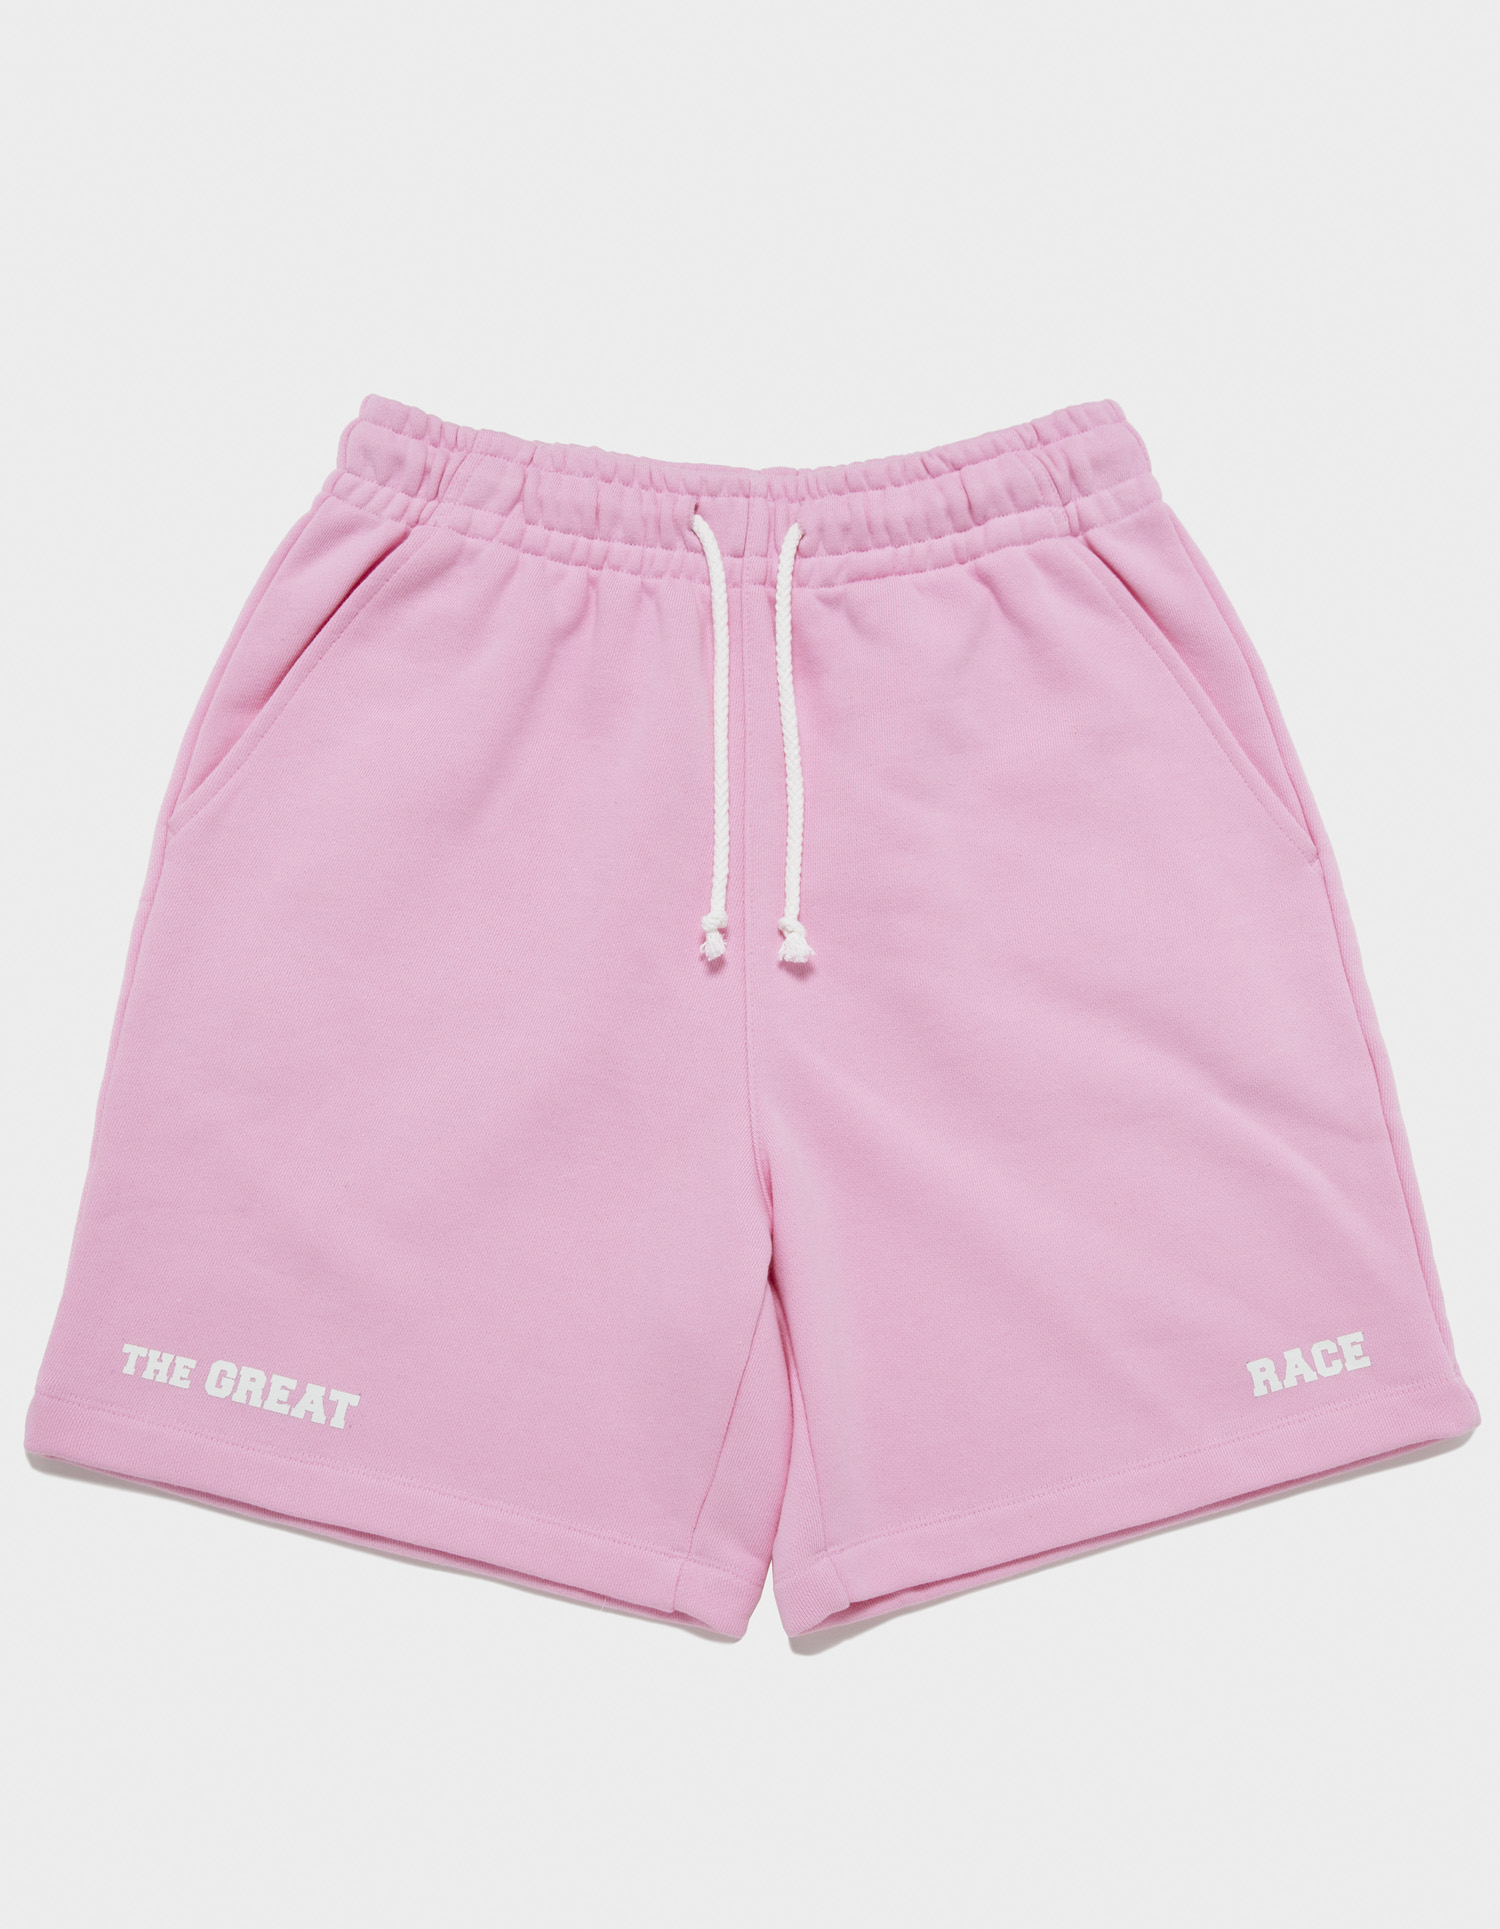 &#039;THE GREAT RACE&#039; Basketball Shorts (PINK) - 포니테일